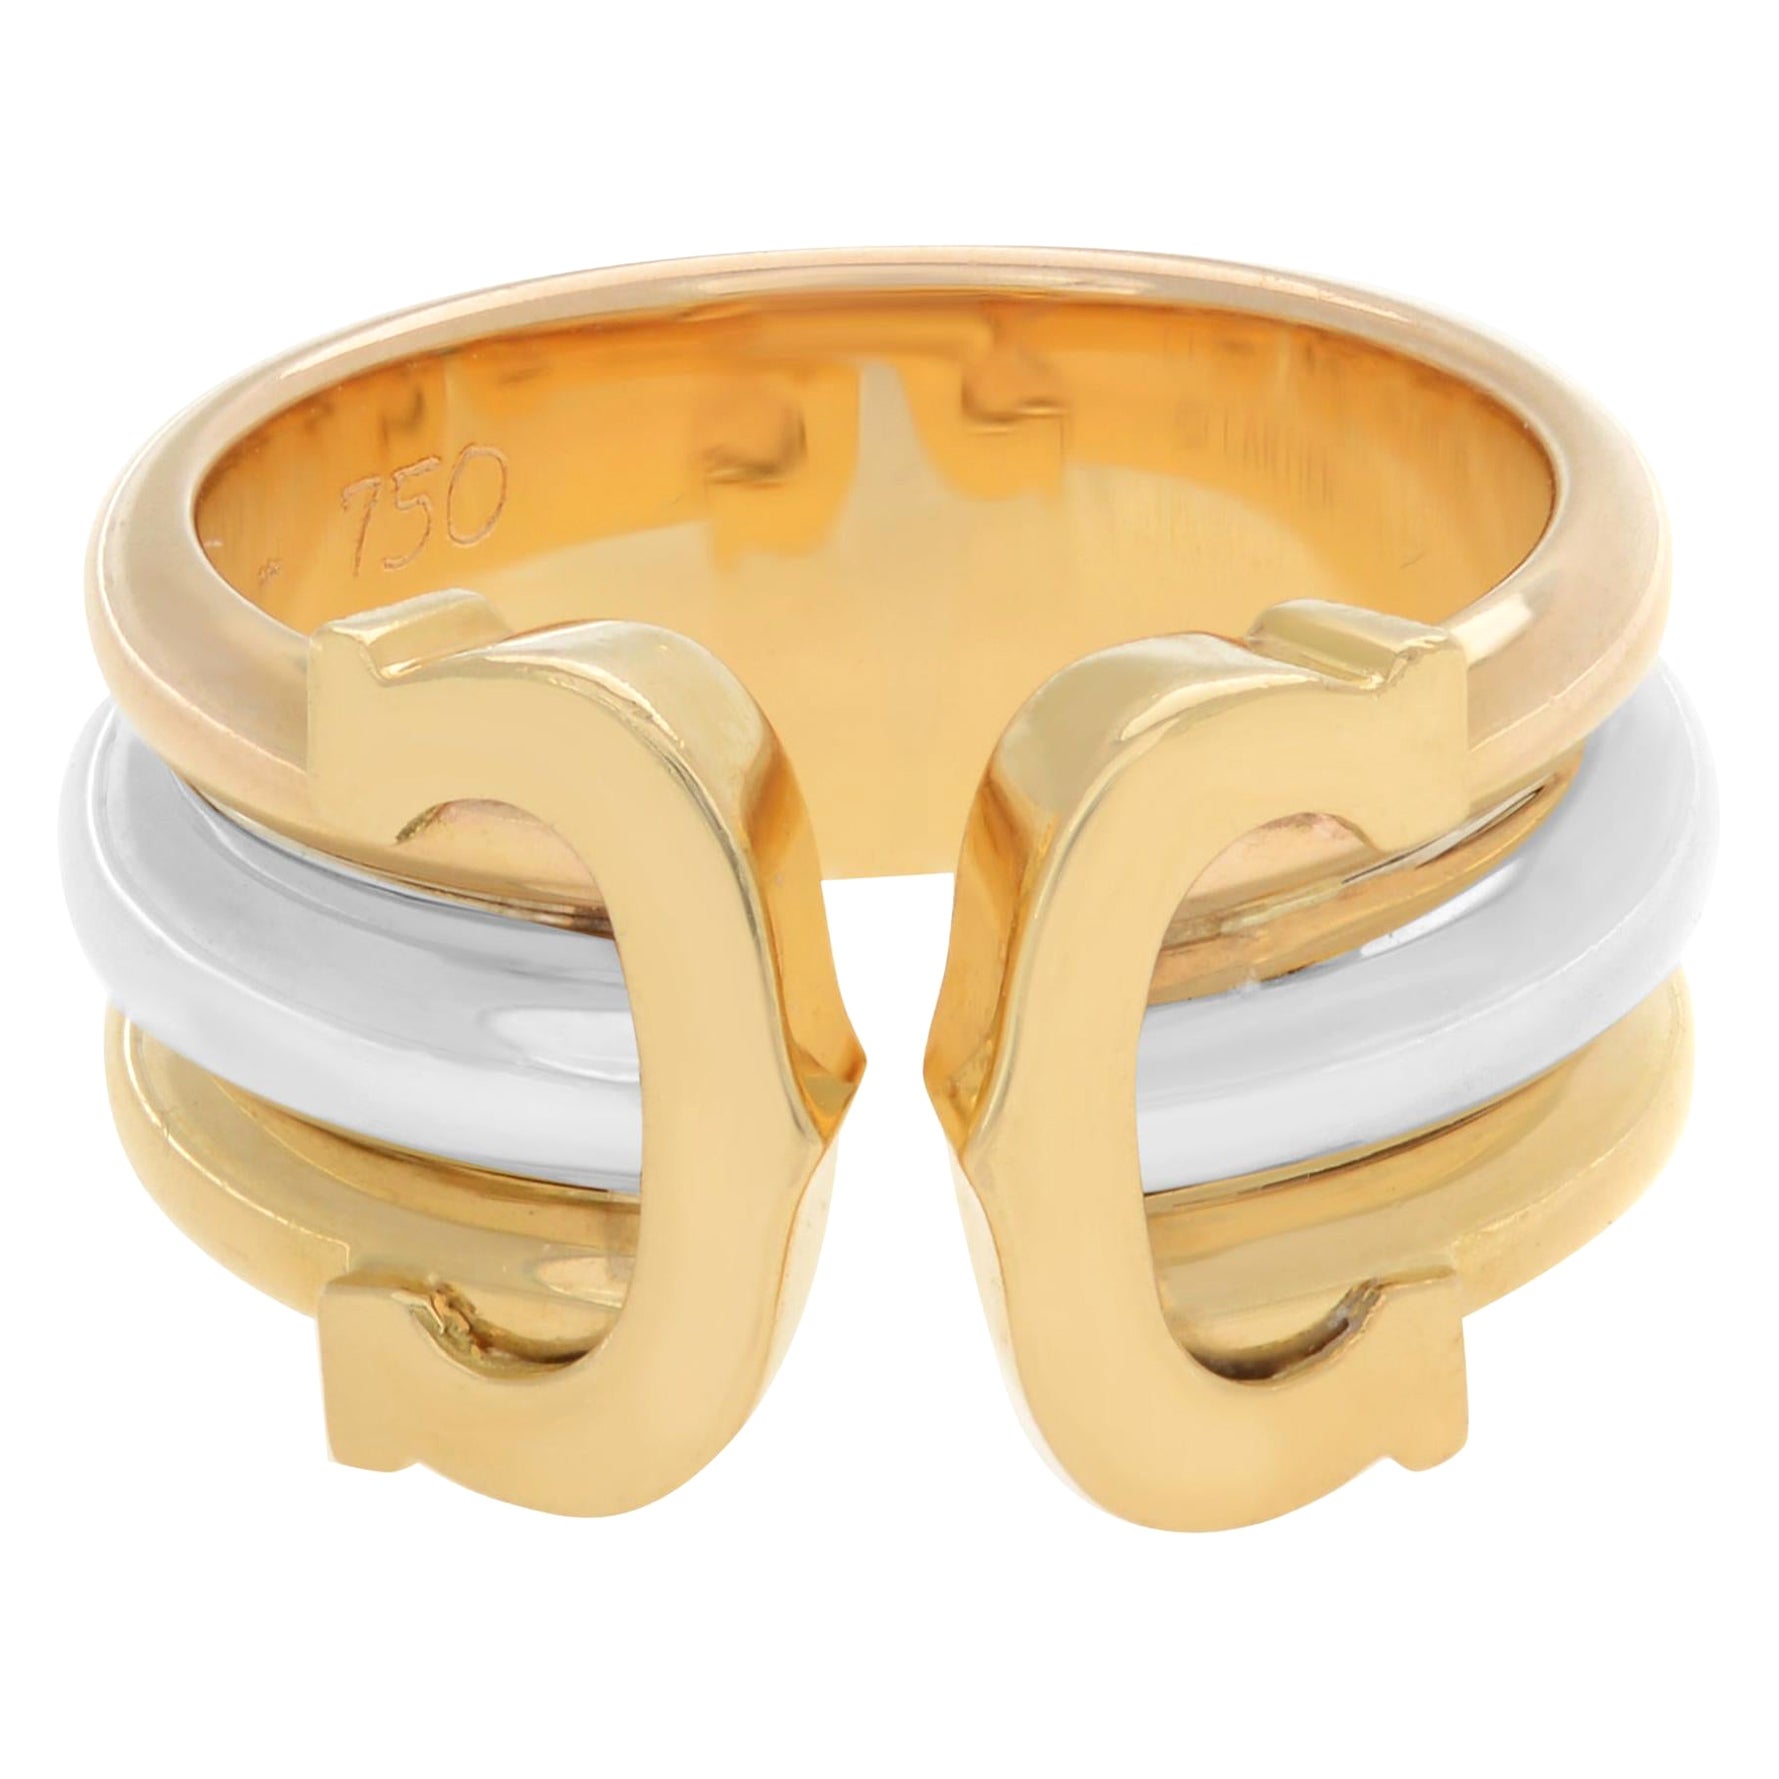 Louis Vuitton - Colour Blossom Ring Yellow Gold White Gold and Diamonds - Gold - Unisex - Size: 51 - Luxury